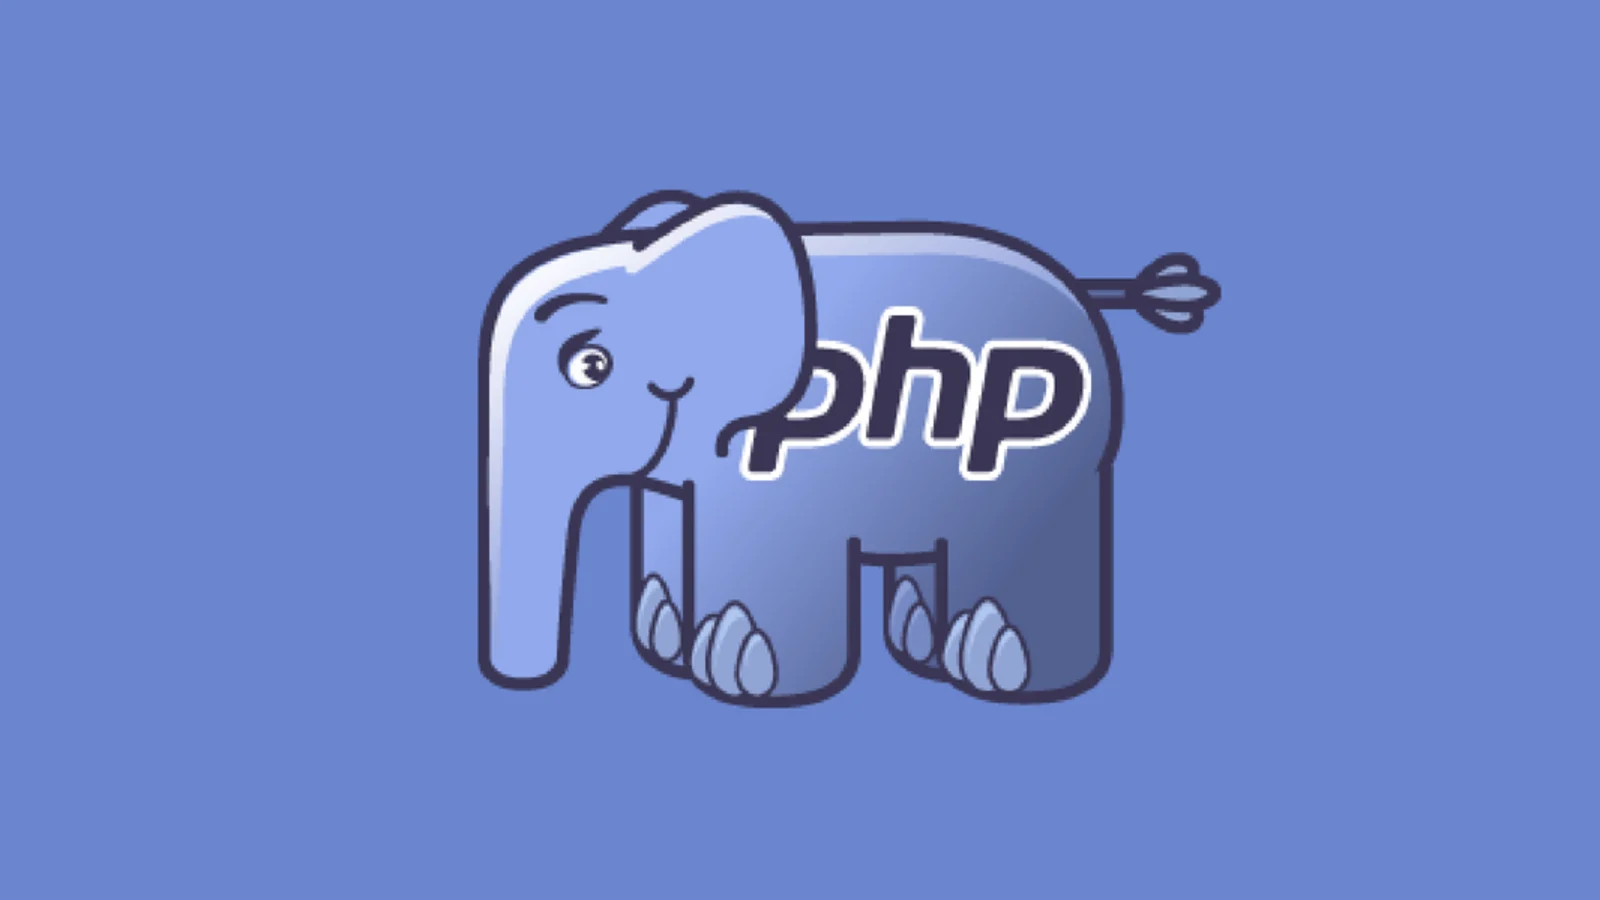 Is PHP Dead or Still have a Future in Web Development? | Why to Use PHP as Your Next Web Development Language